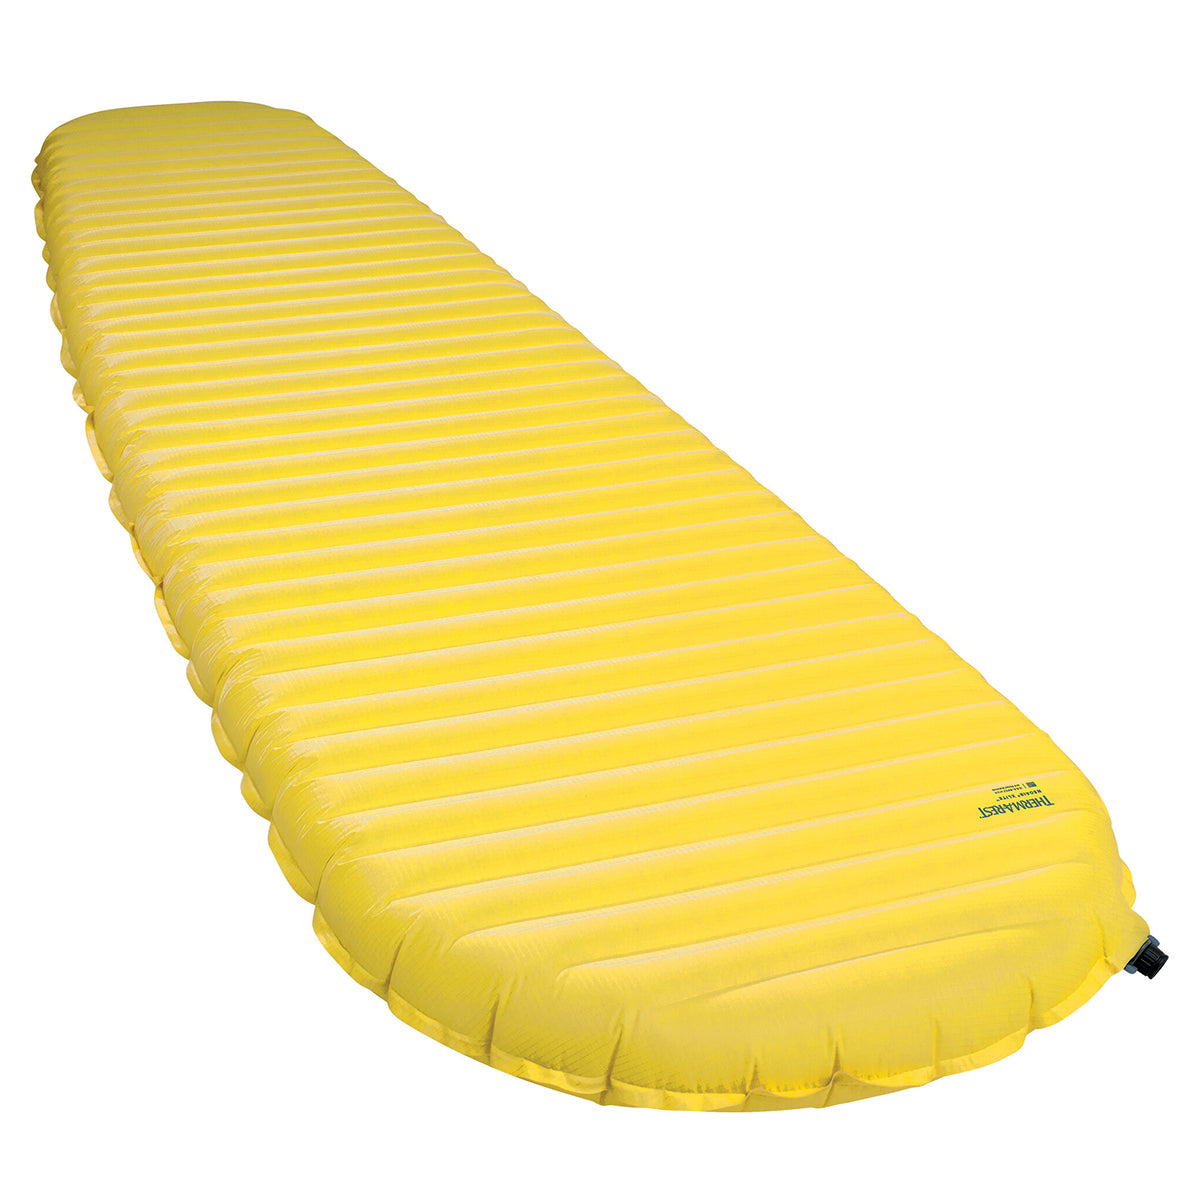 Therm-A-Rest NeoAir Xlite Sleeping Pad 2020 by Thermarest | Camping - goHUNT Shop